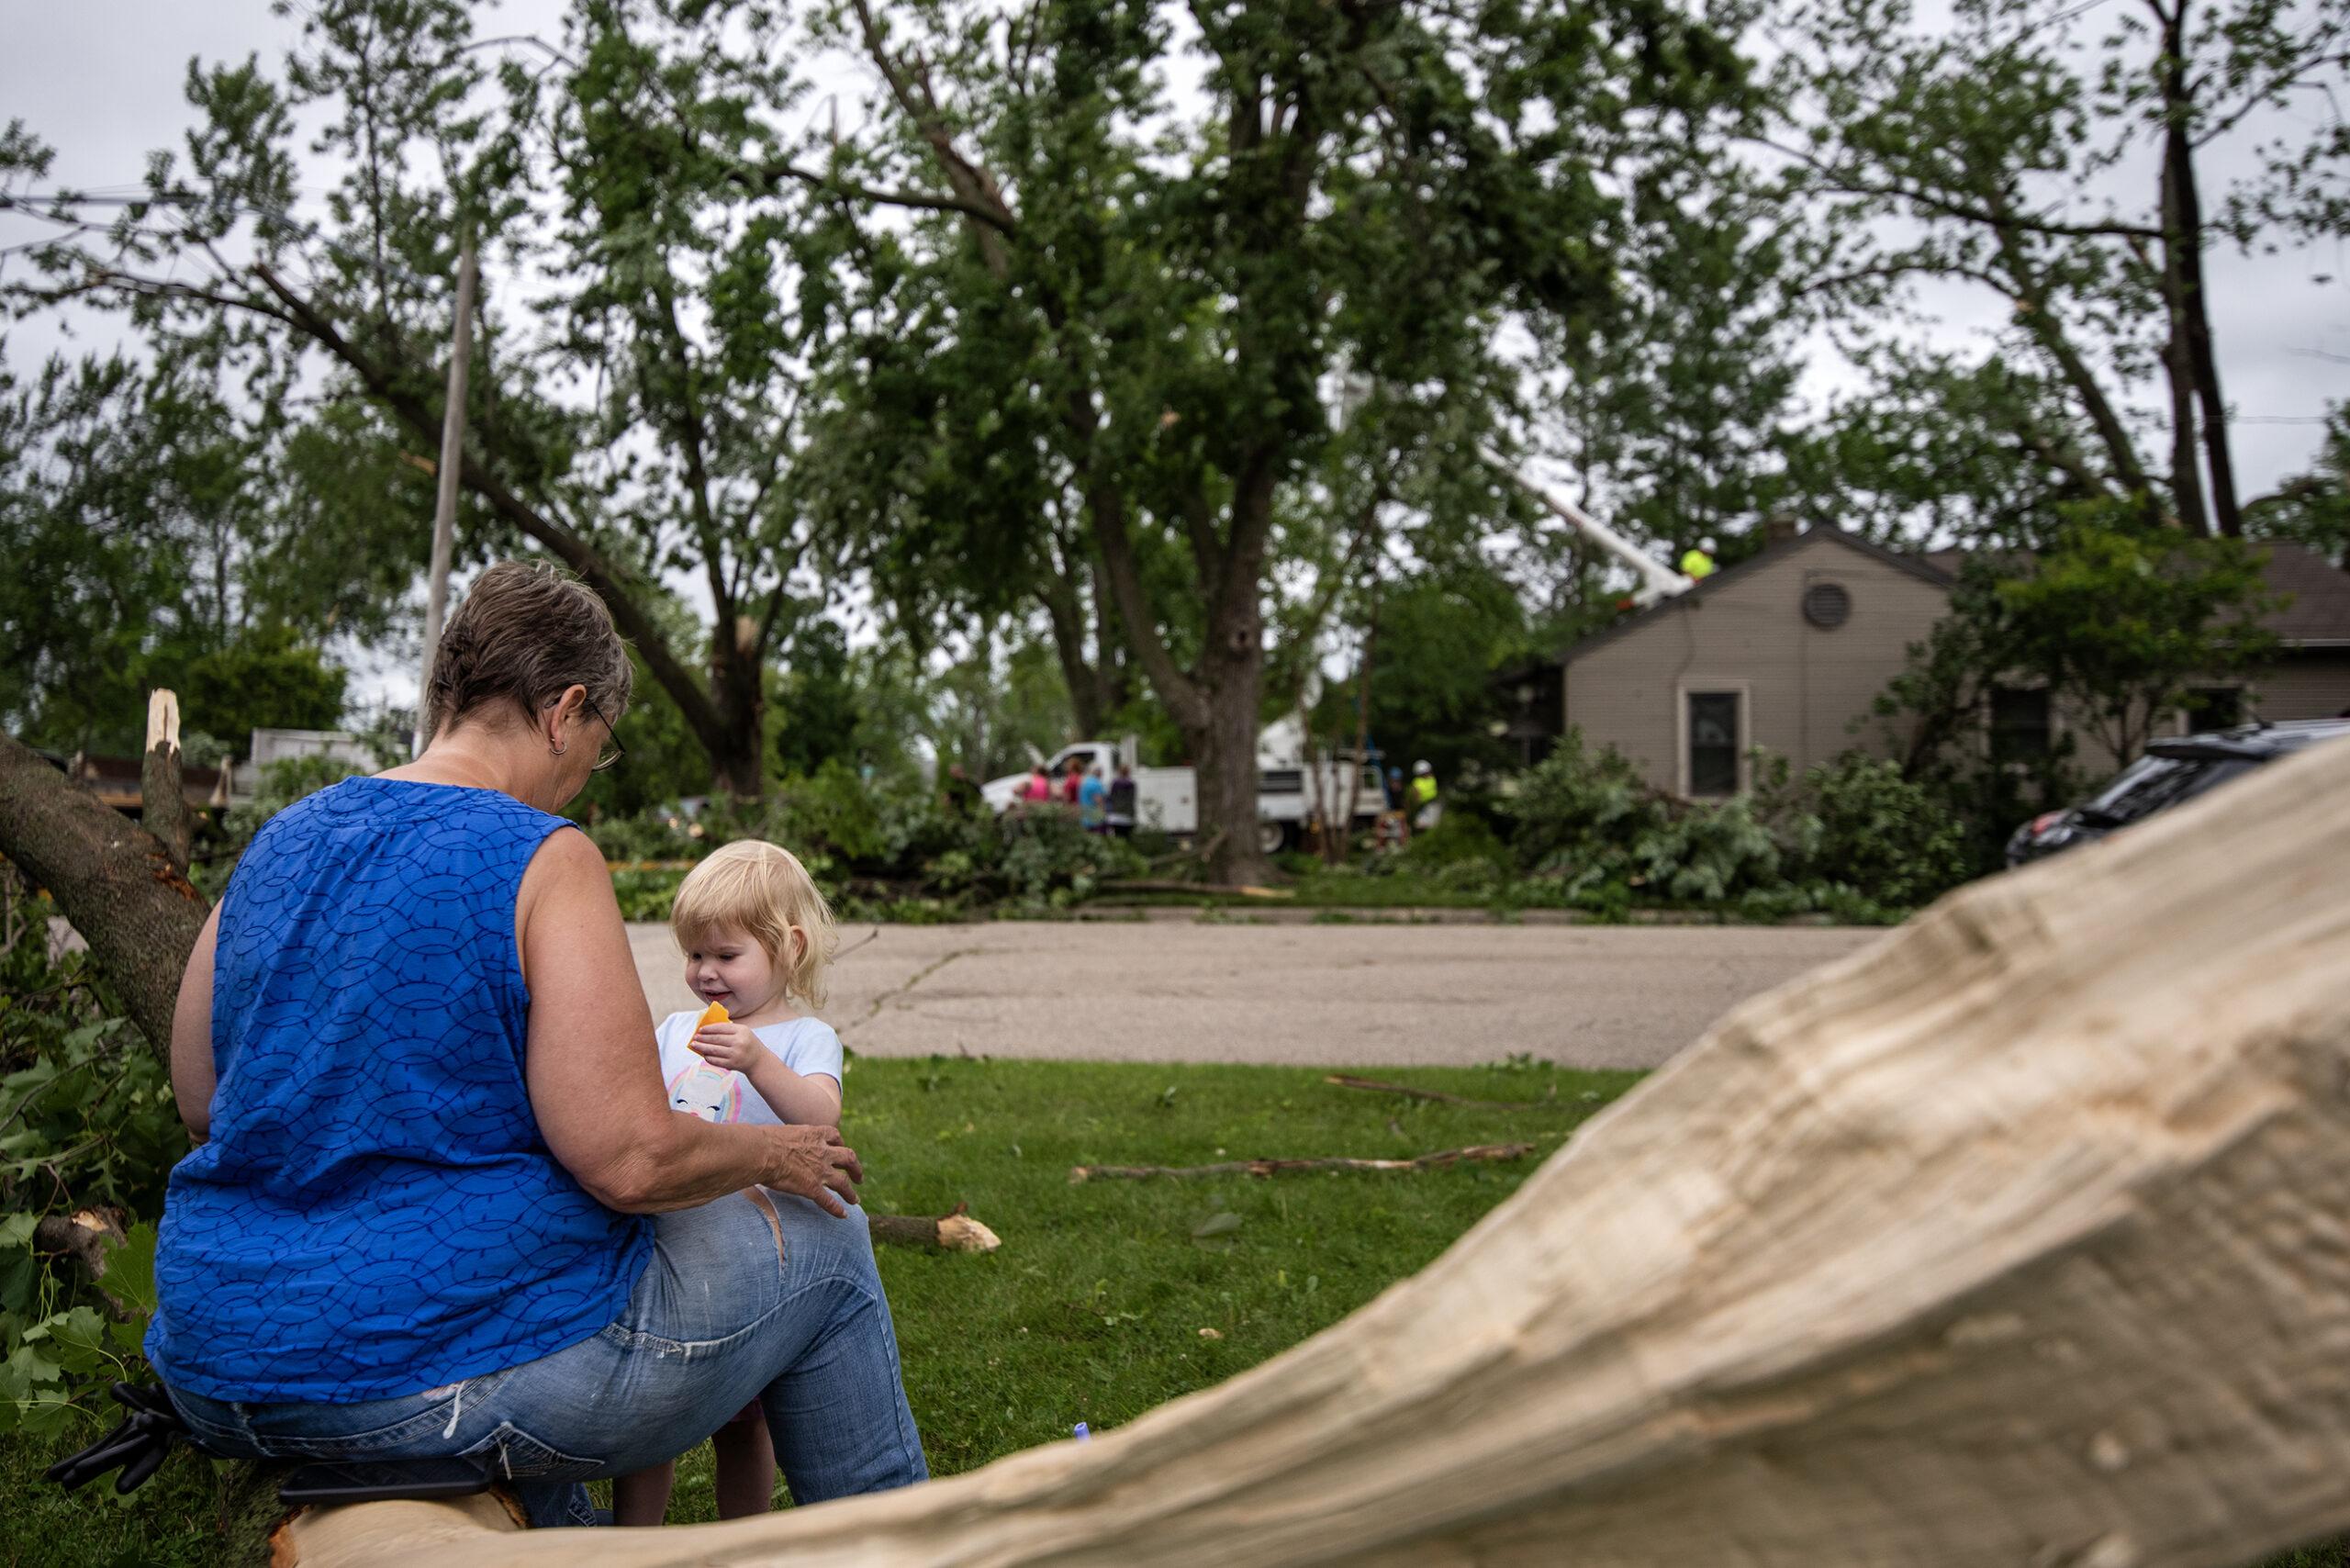 Wisconsin sees another round of severe weather, tornadoes Saturday night